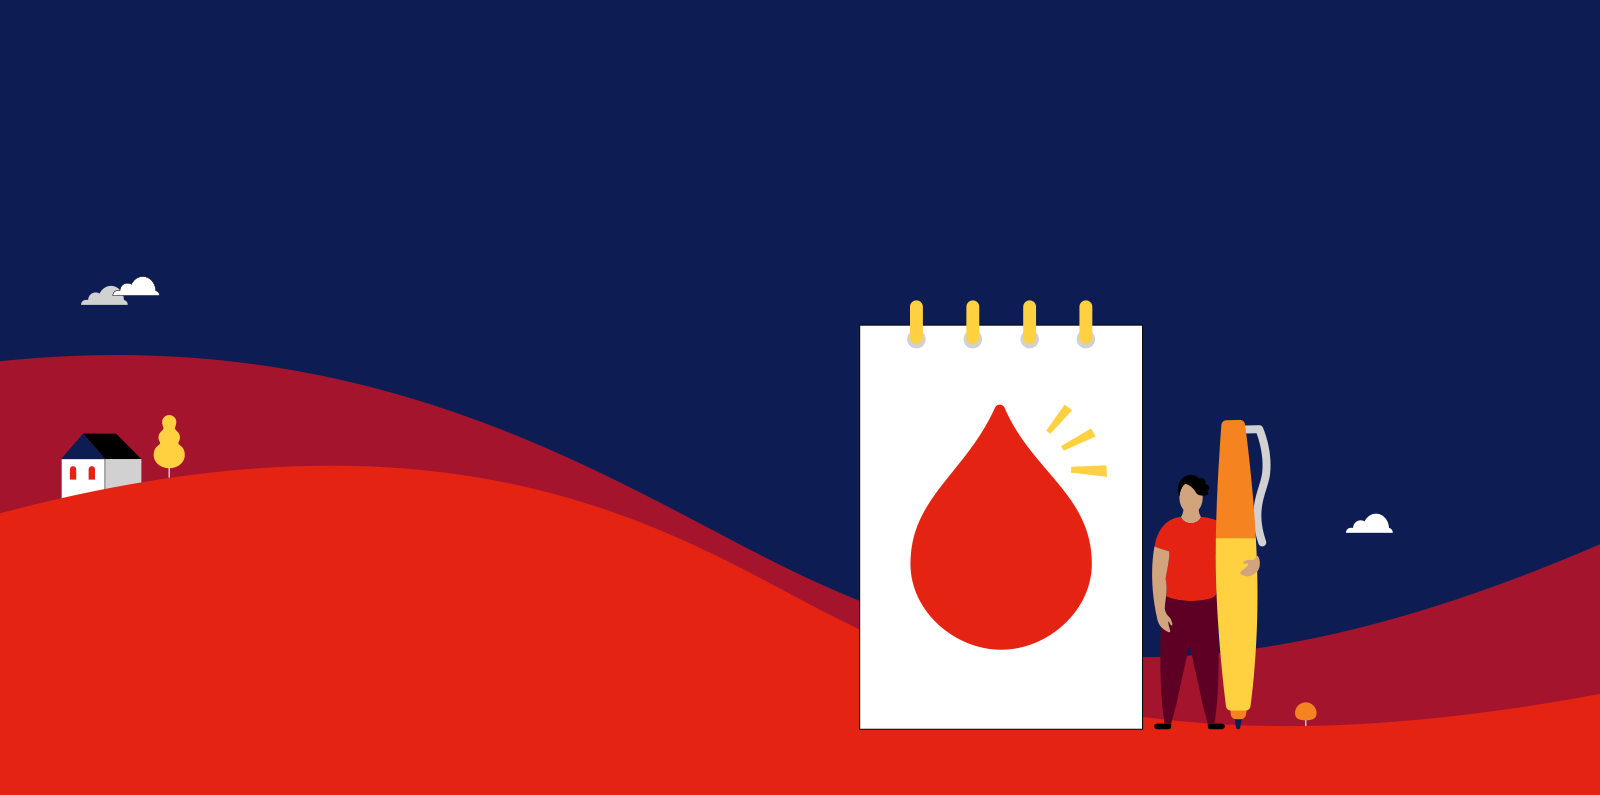 illustration of a person holding a giant pen standing next to a notepad with a big red blood drop on it